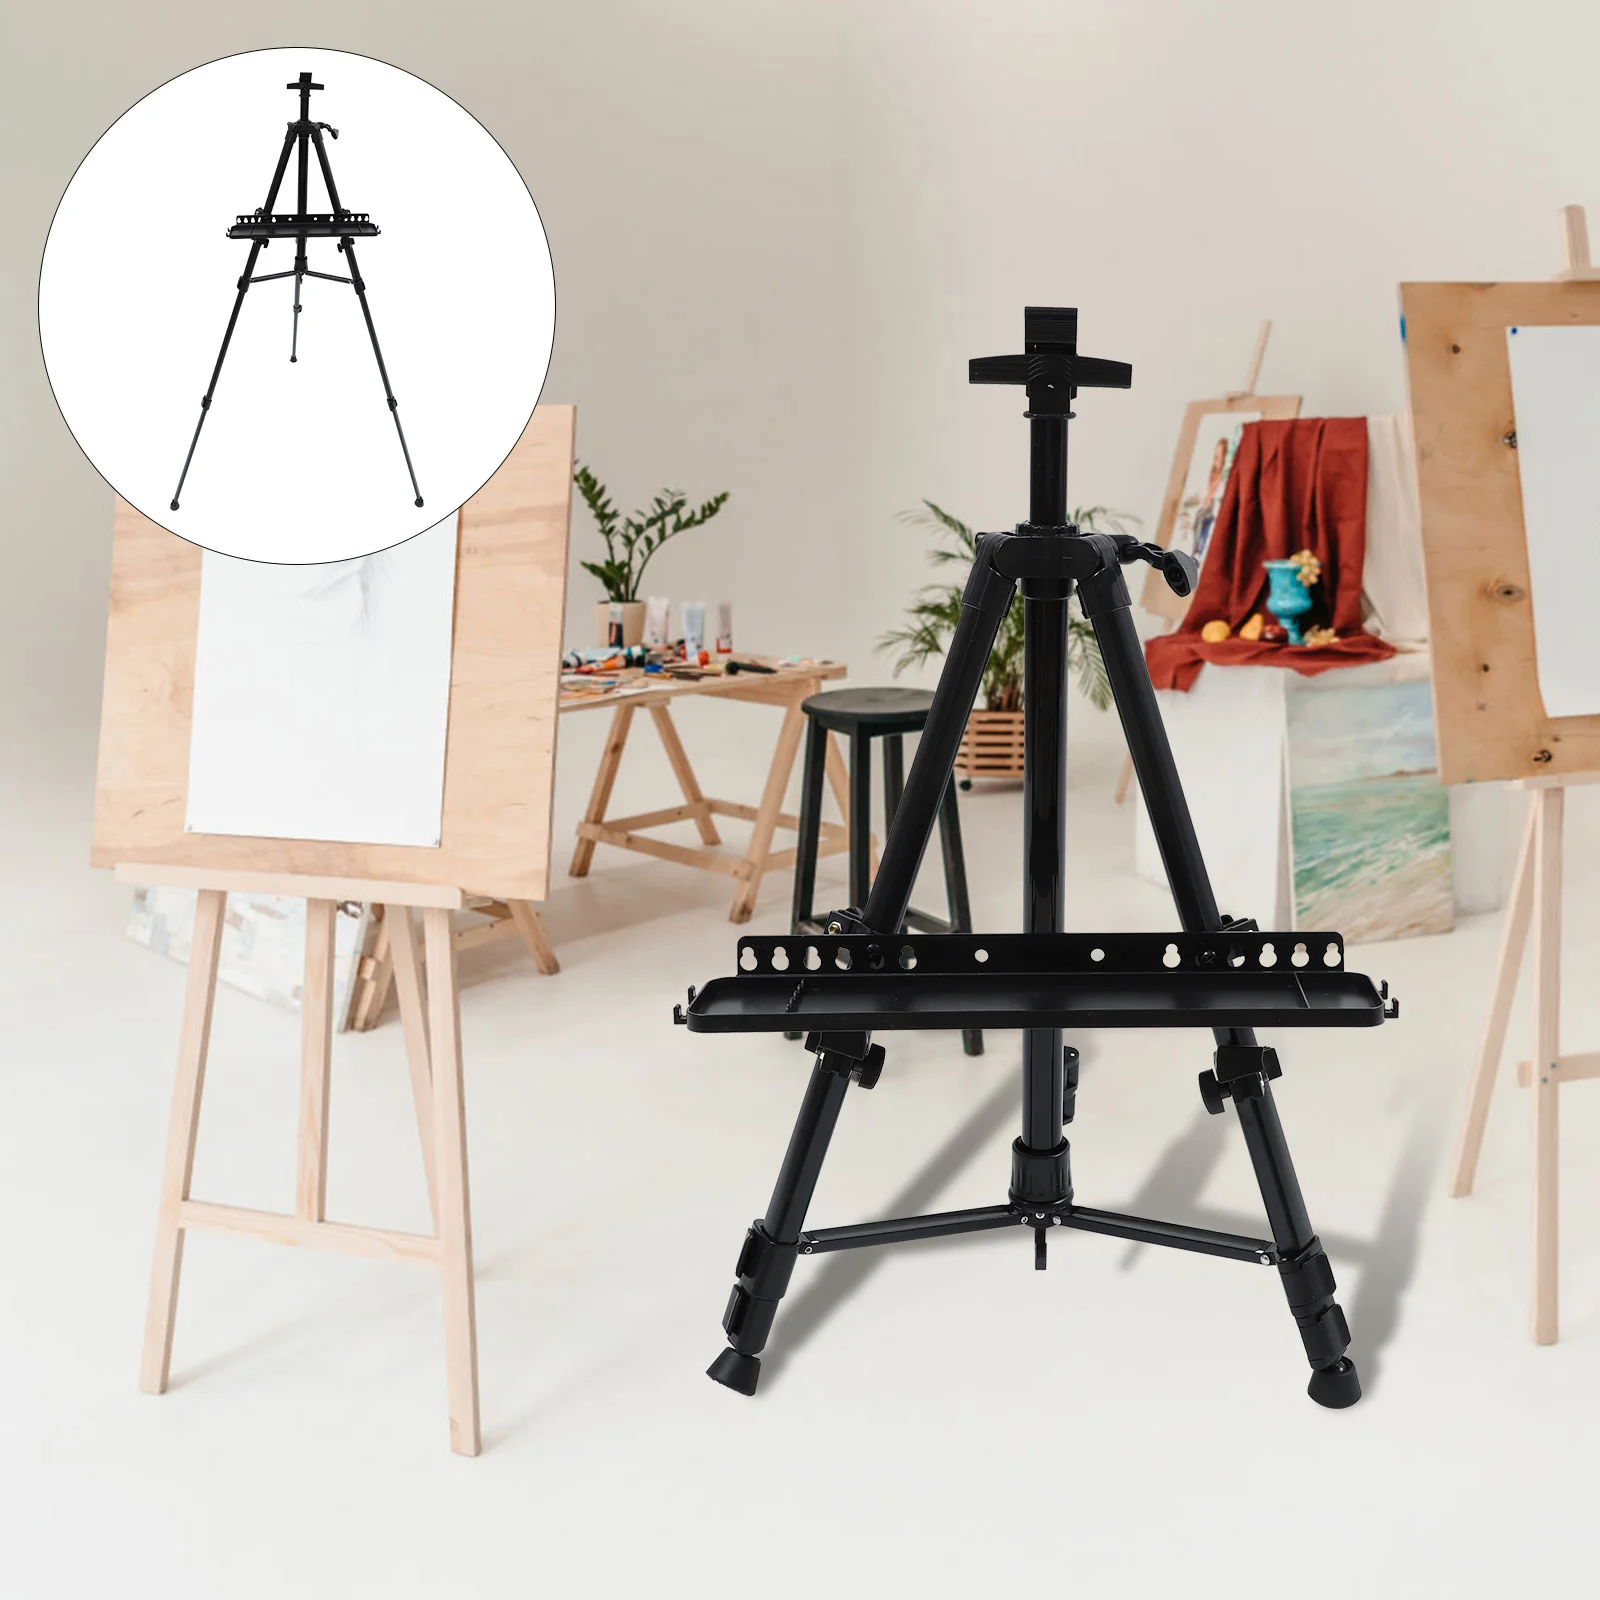 Folding Easel Drawing Board Stand Kids Adjustable Hand Shaking Painting Rack Plastic Child Tripod